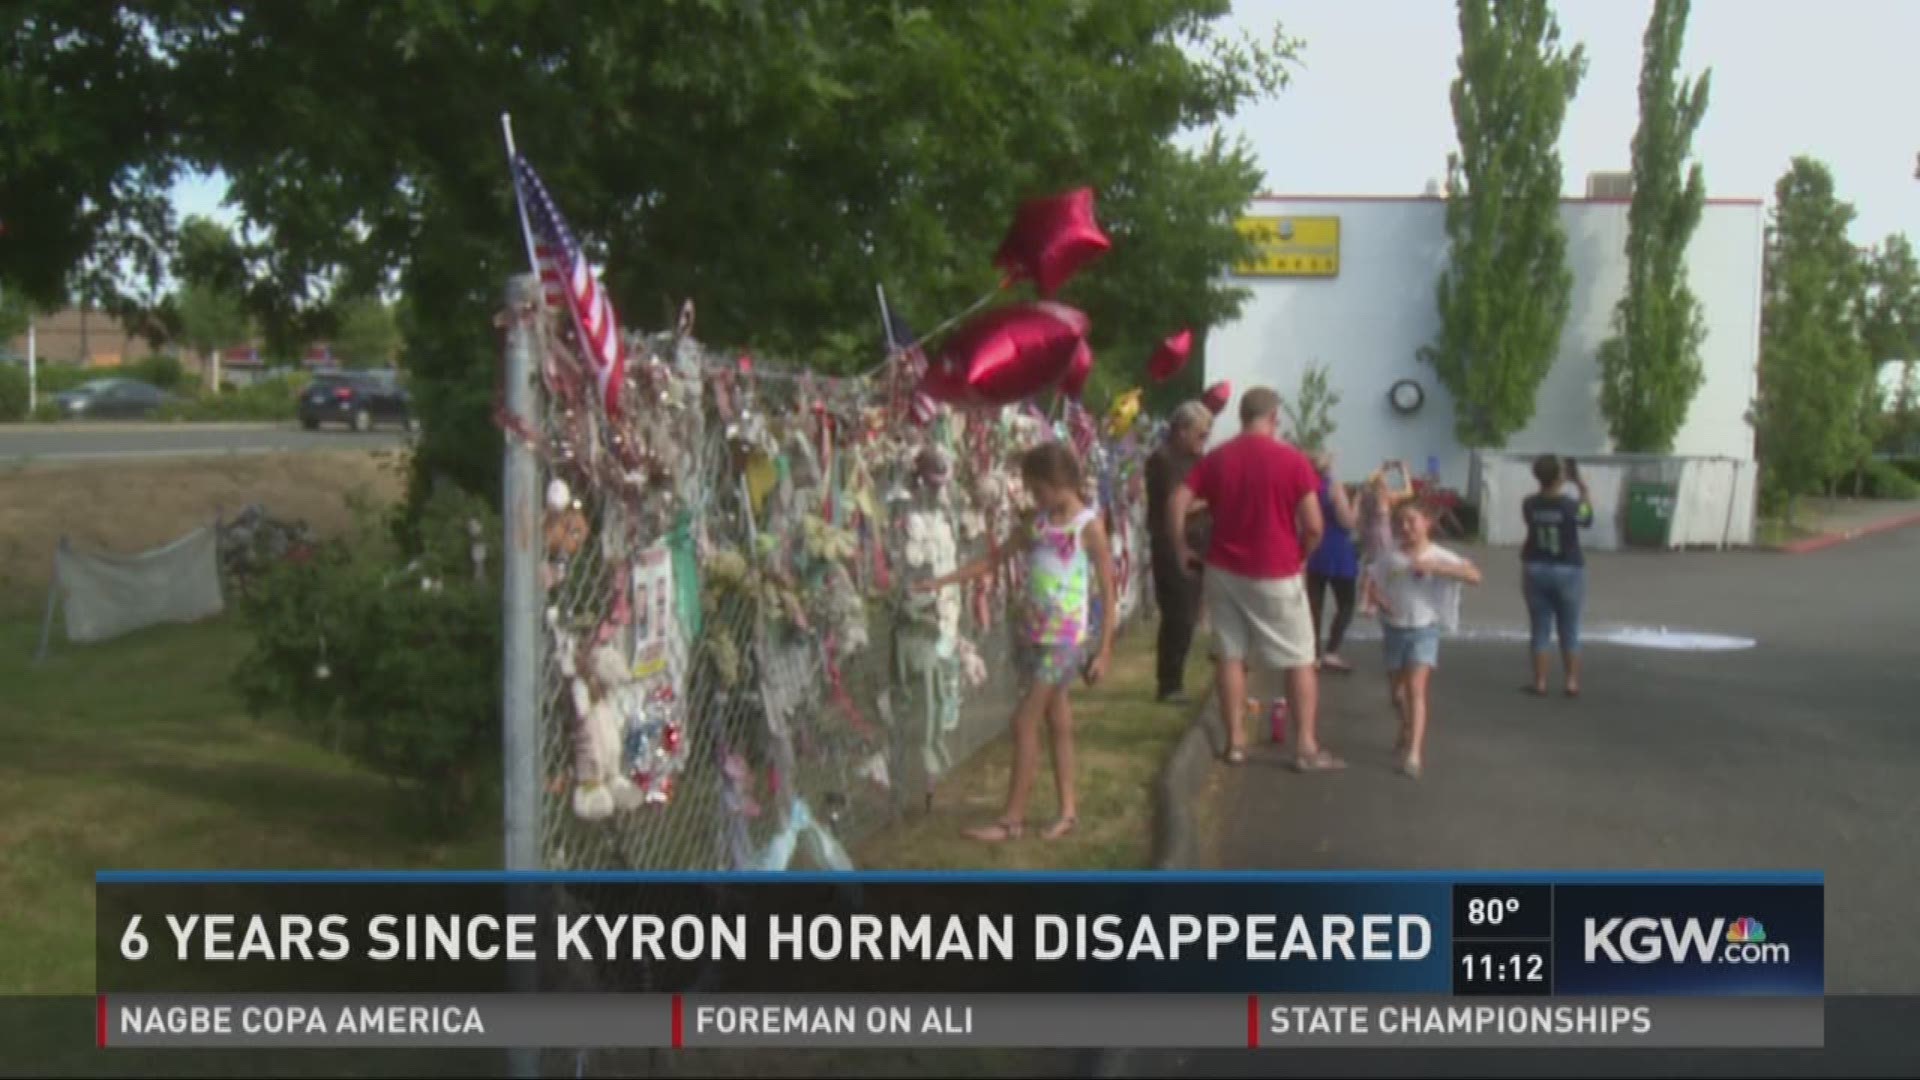 Supporters gather on 6th anniversary of Kyron Horman's disappearance